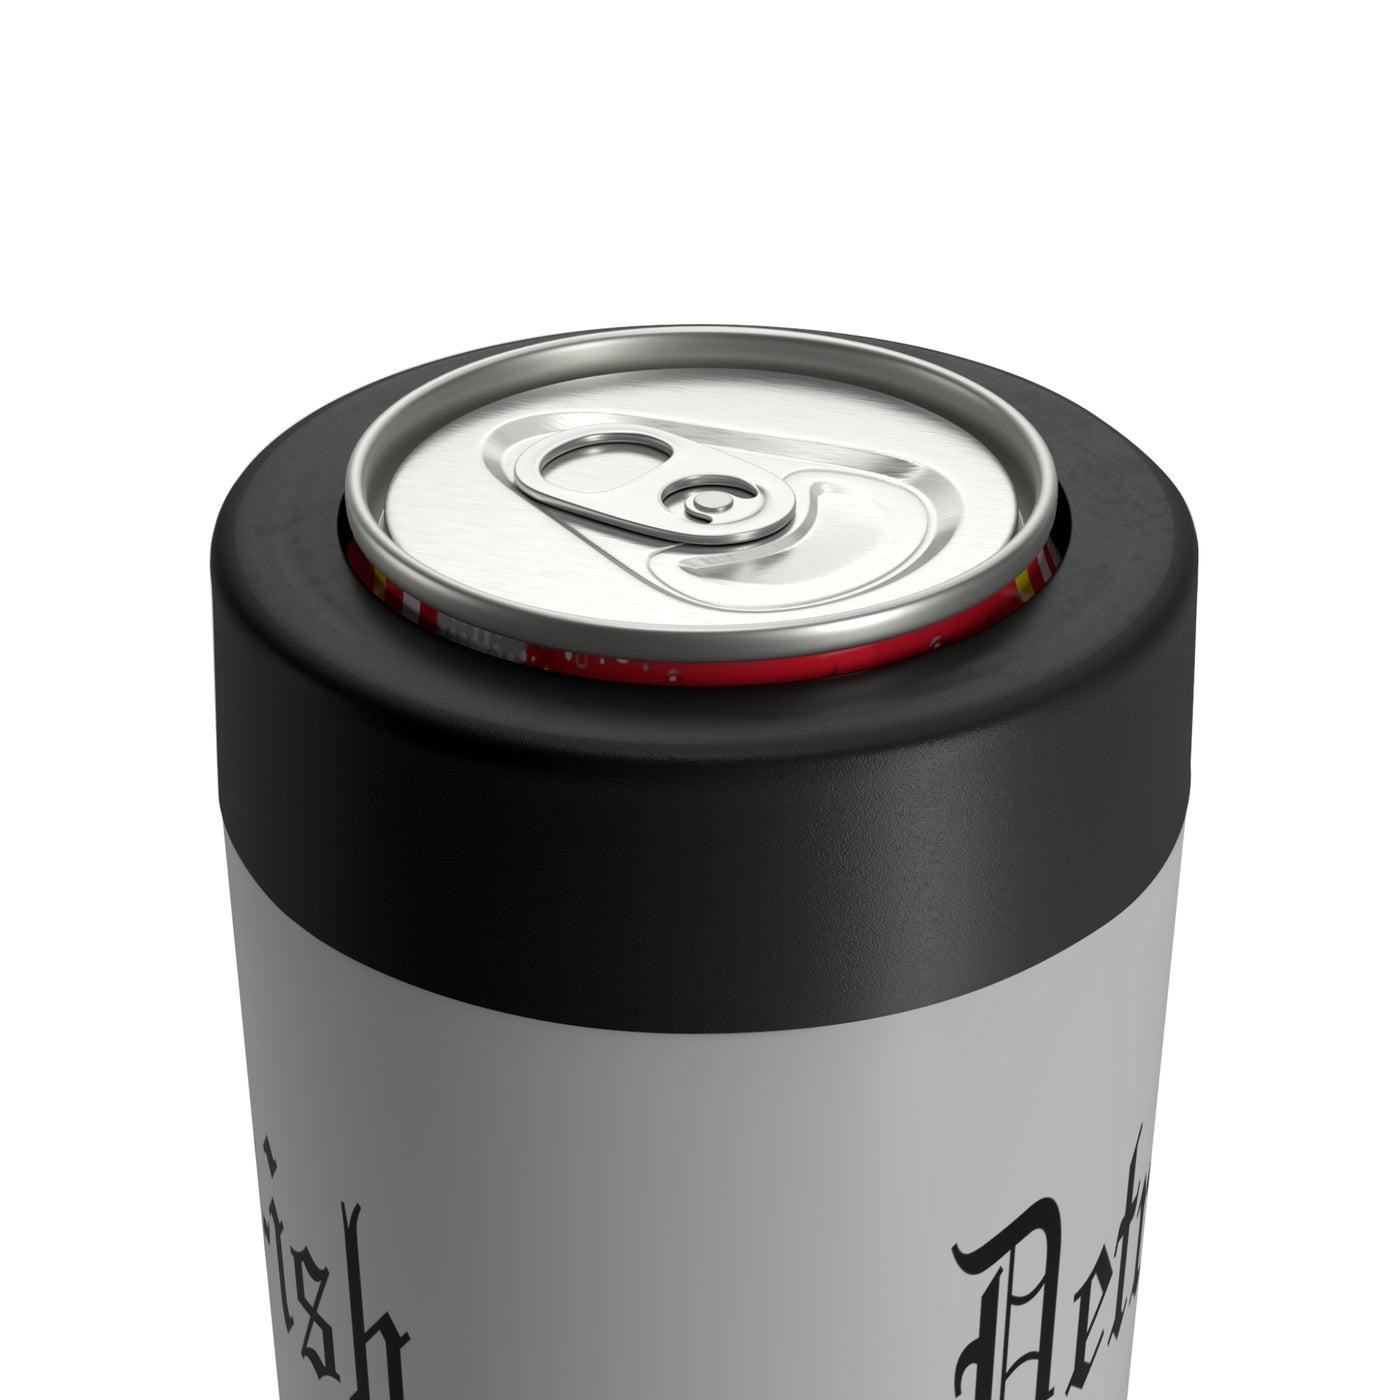 Detroit-ish Stainless Steel Can Holder